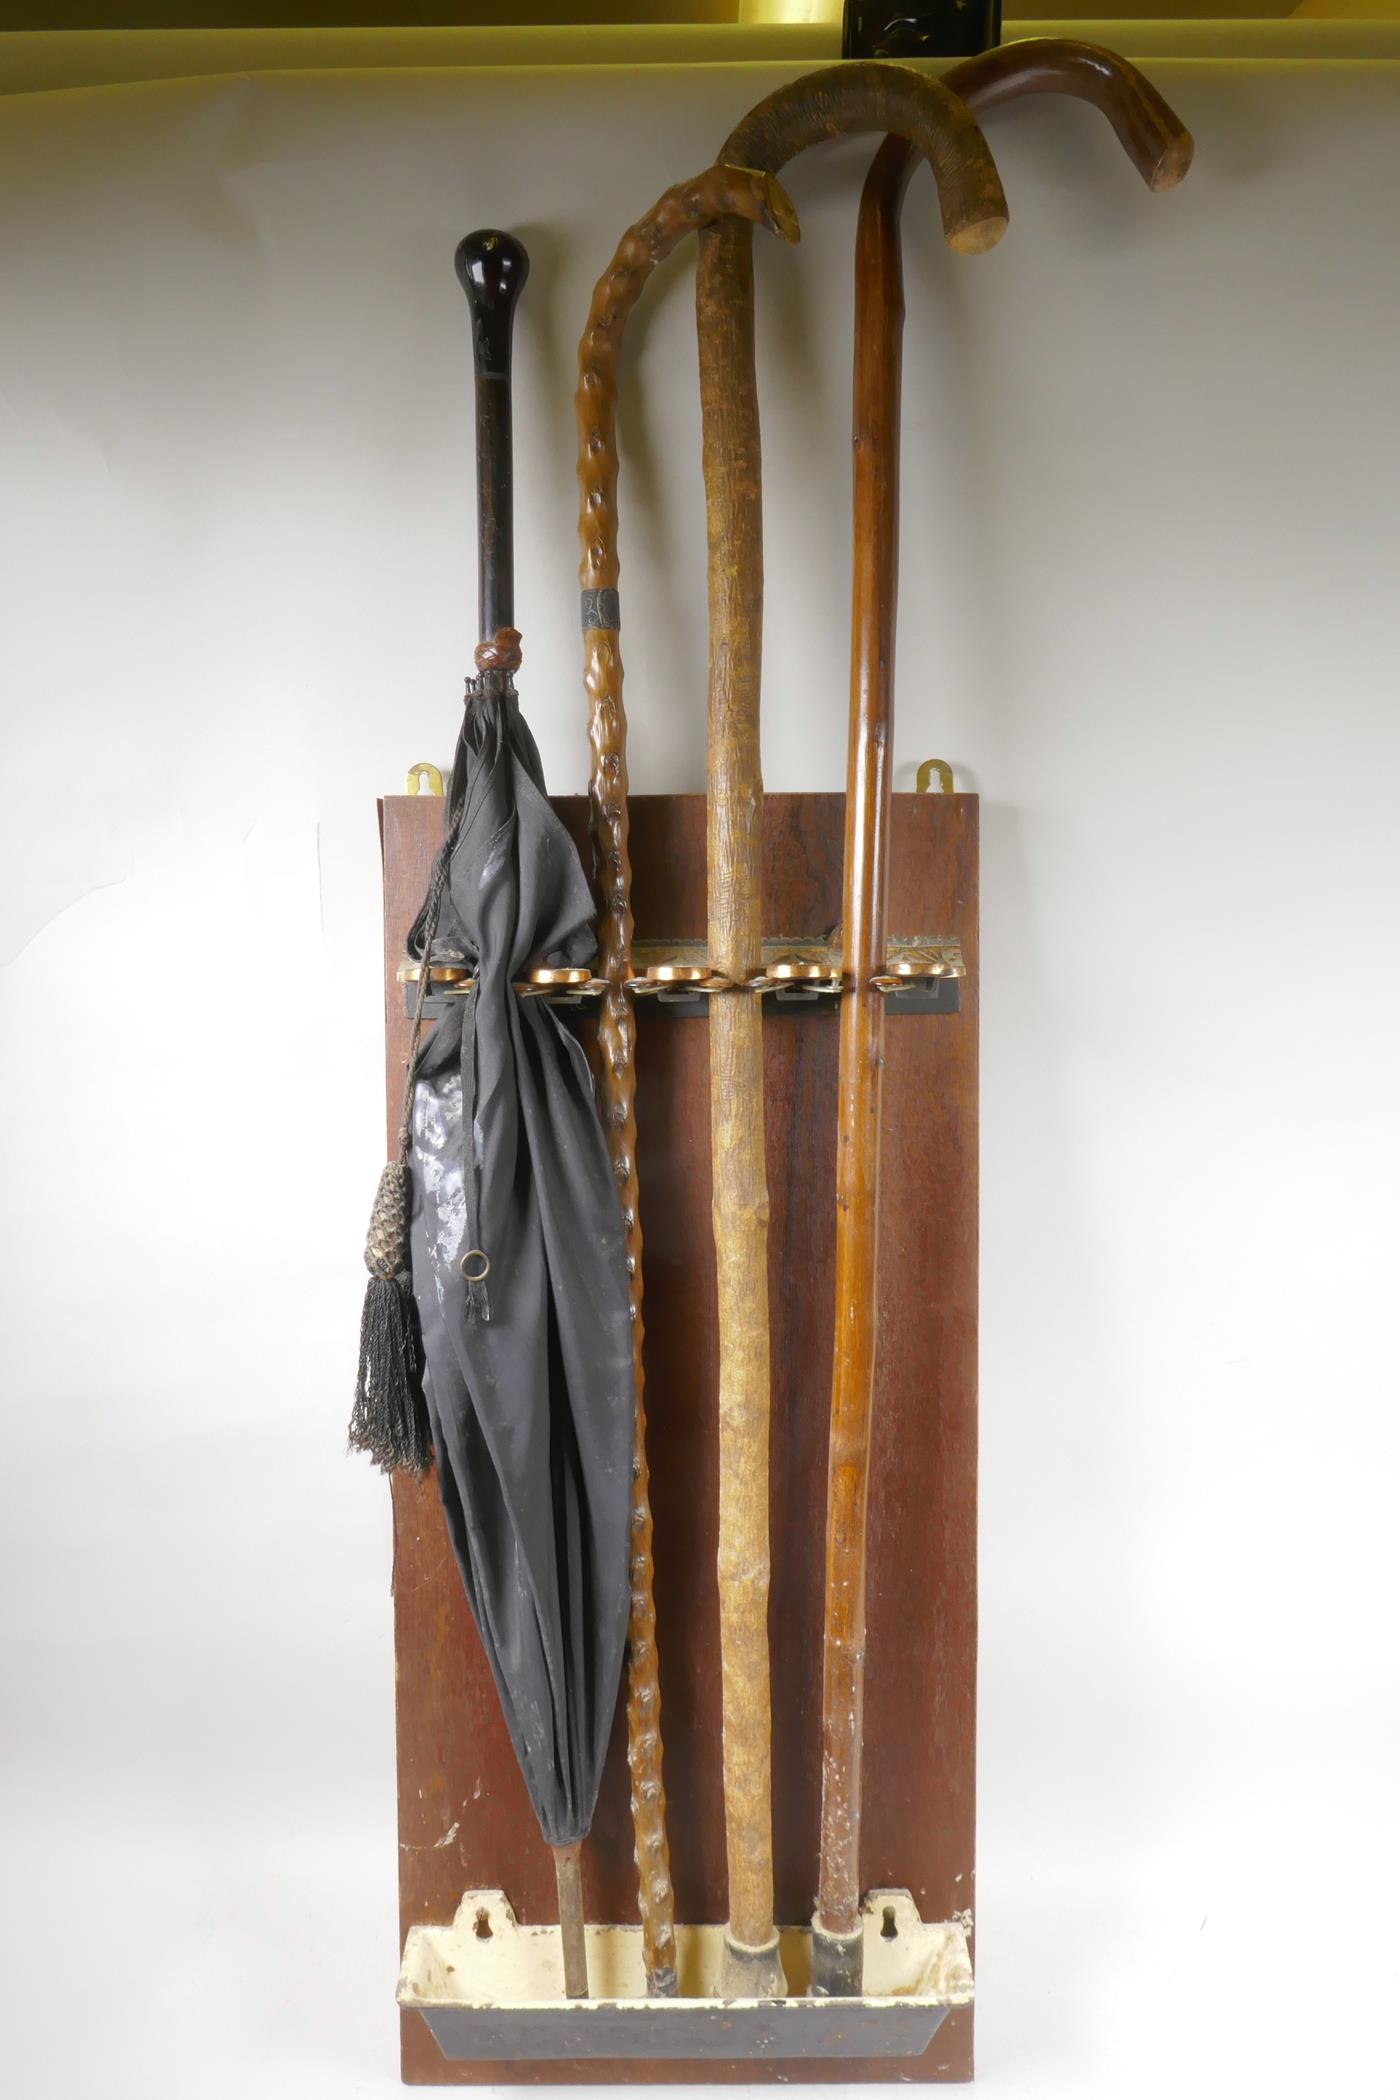 A C19th wall mounted stick stand with patent locking mechanism containing three walking sticks and